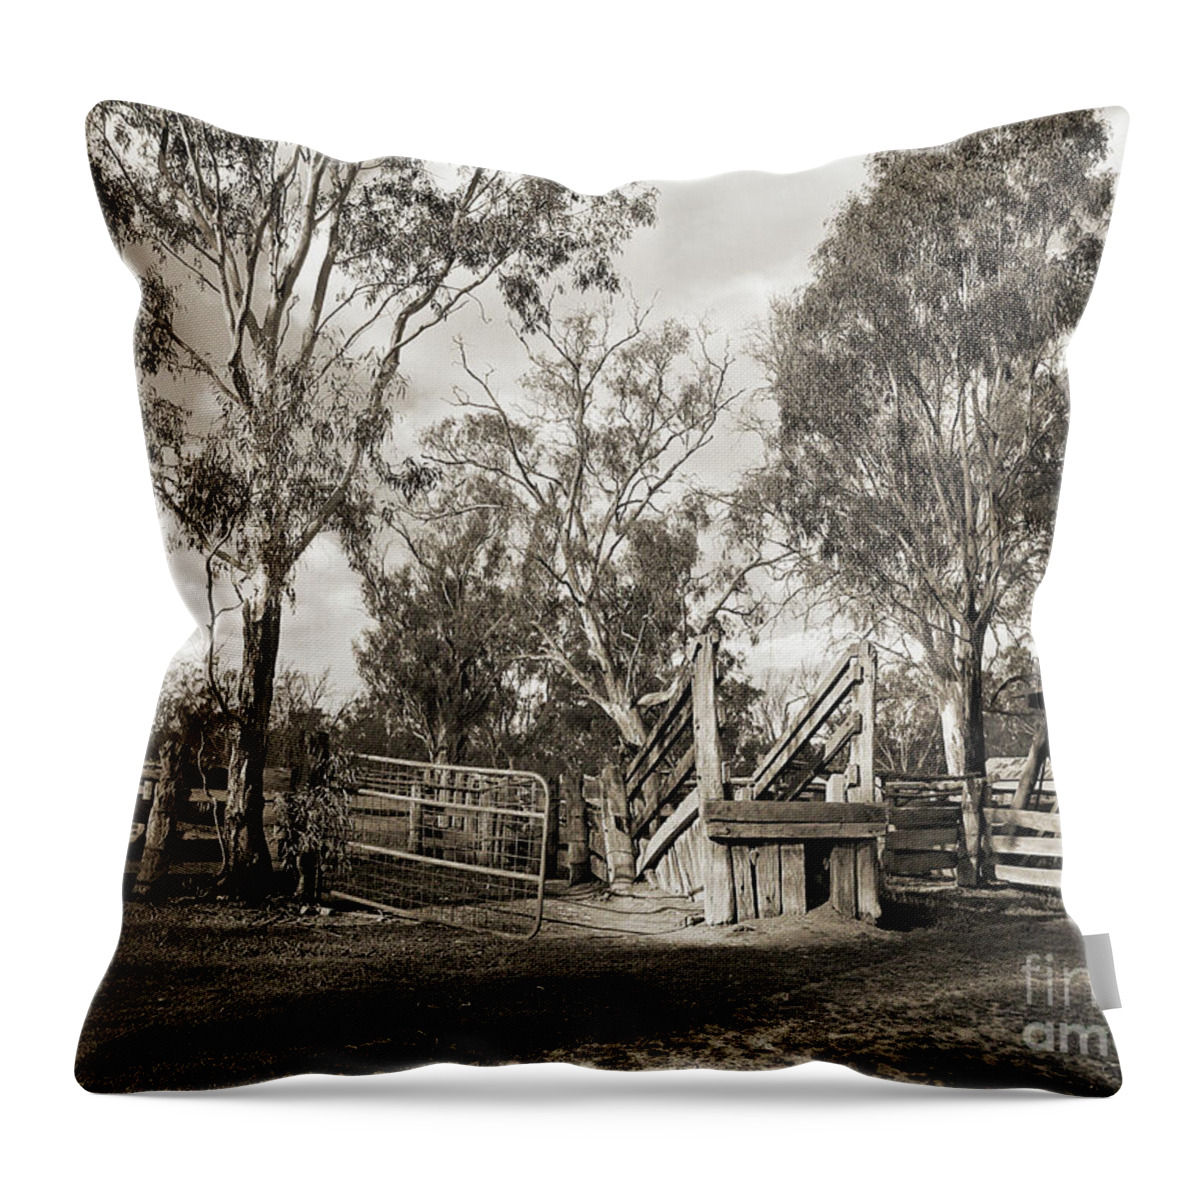 Ramp Throw Pillow featuring the photograph Loading Ramp by Linda Lees